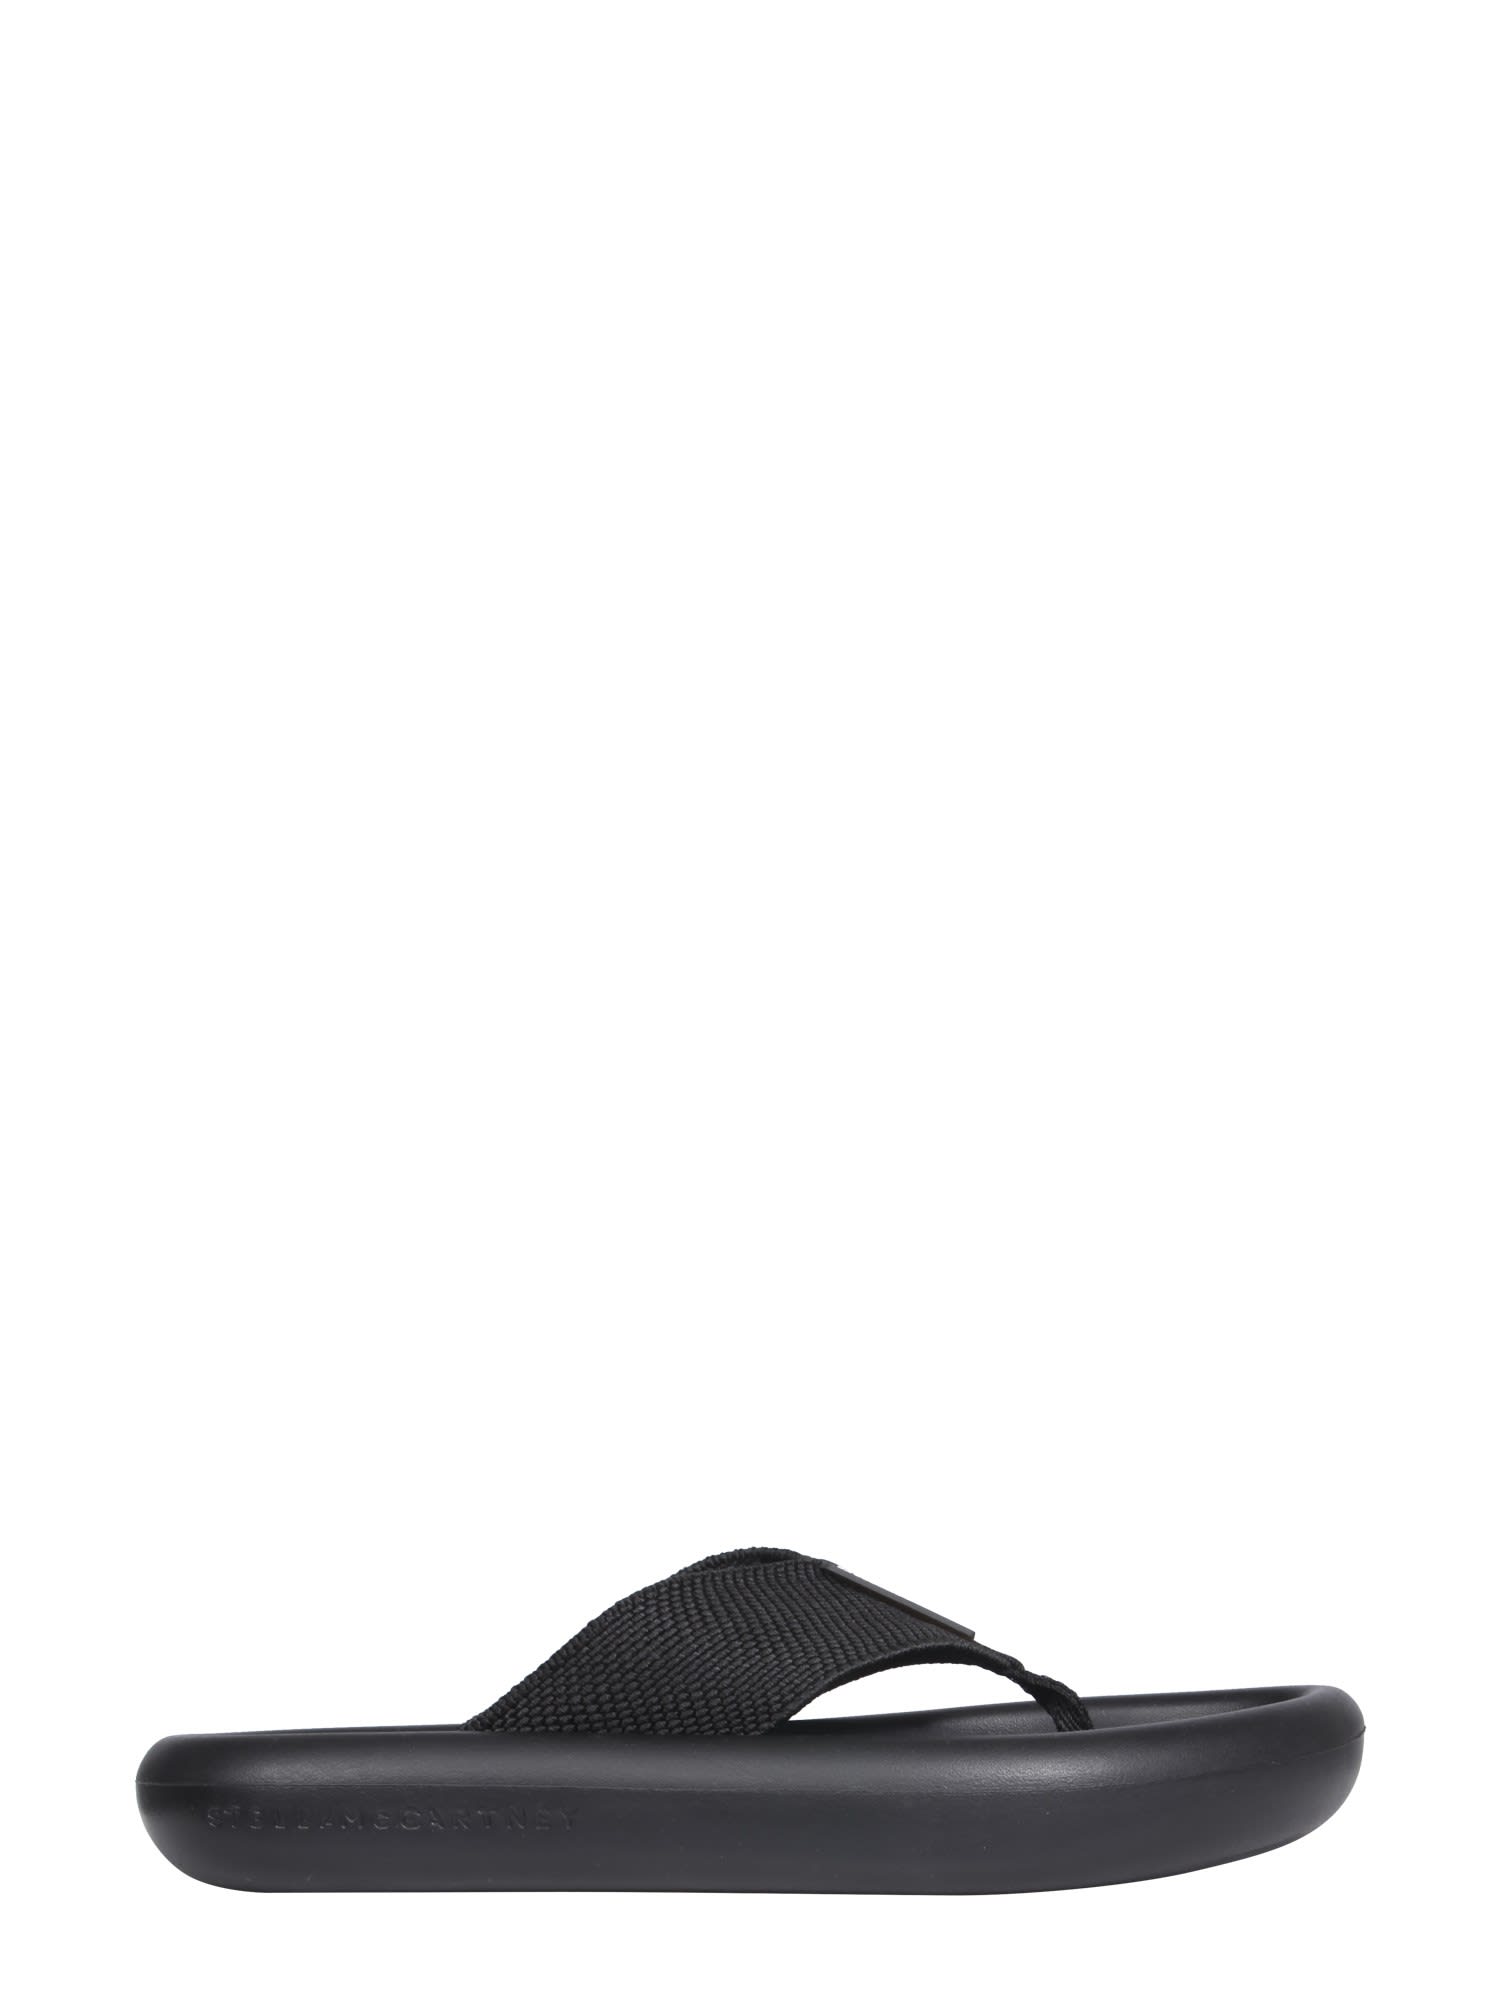 Buy Stella McCartney Air Slide Sandals online, shop Stella McCartney shoes with free shipping